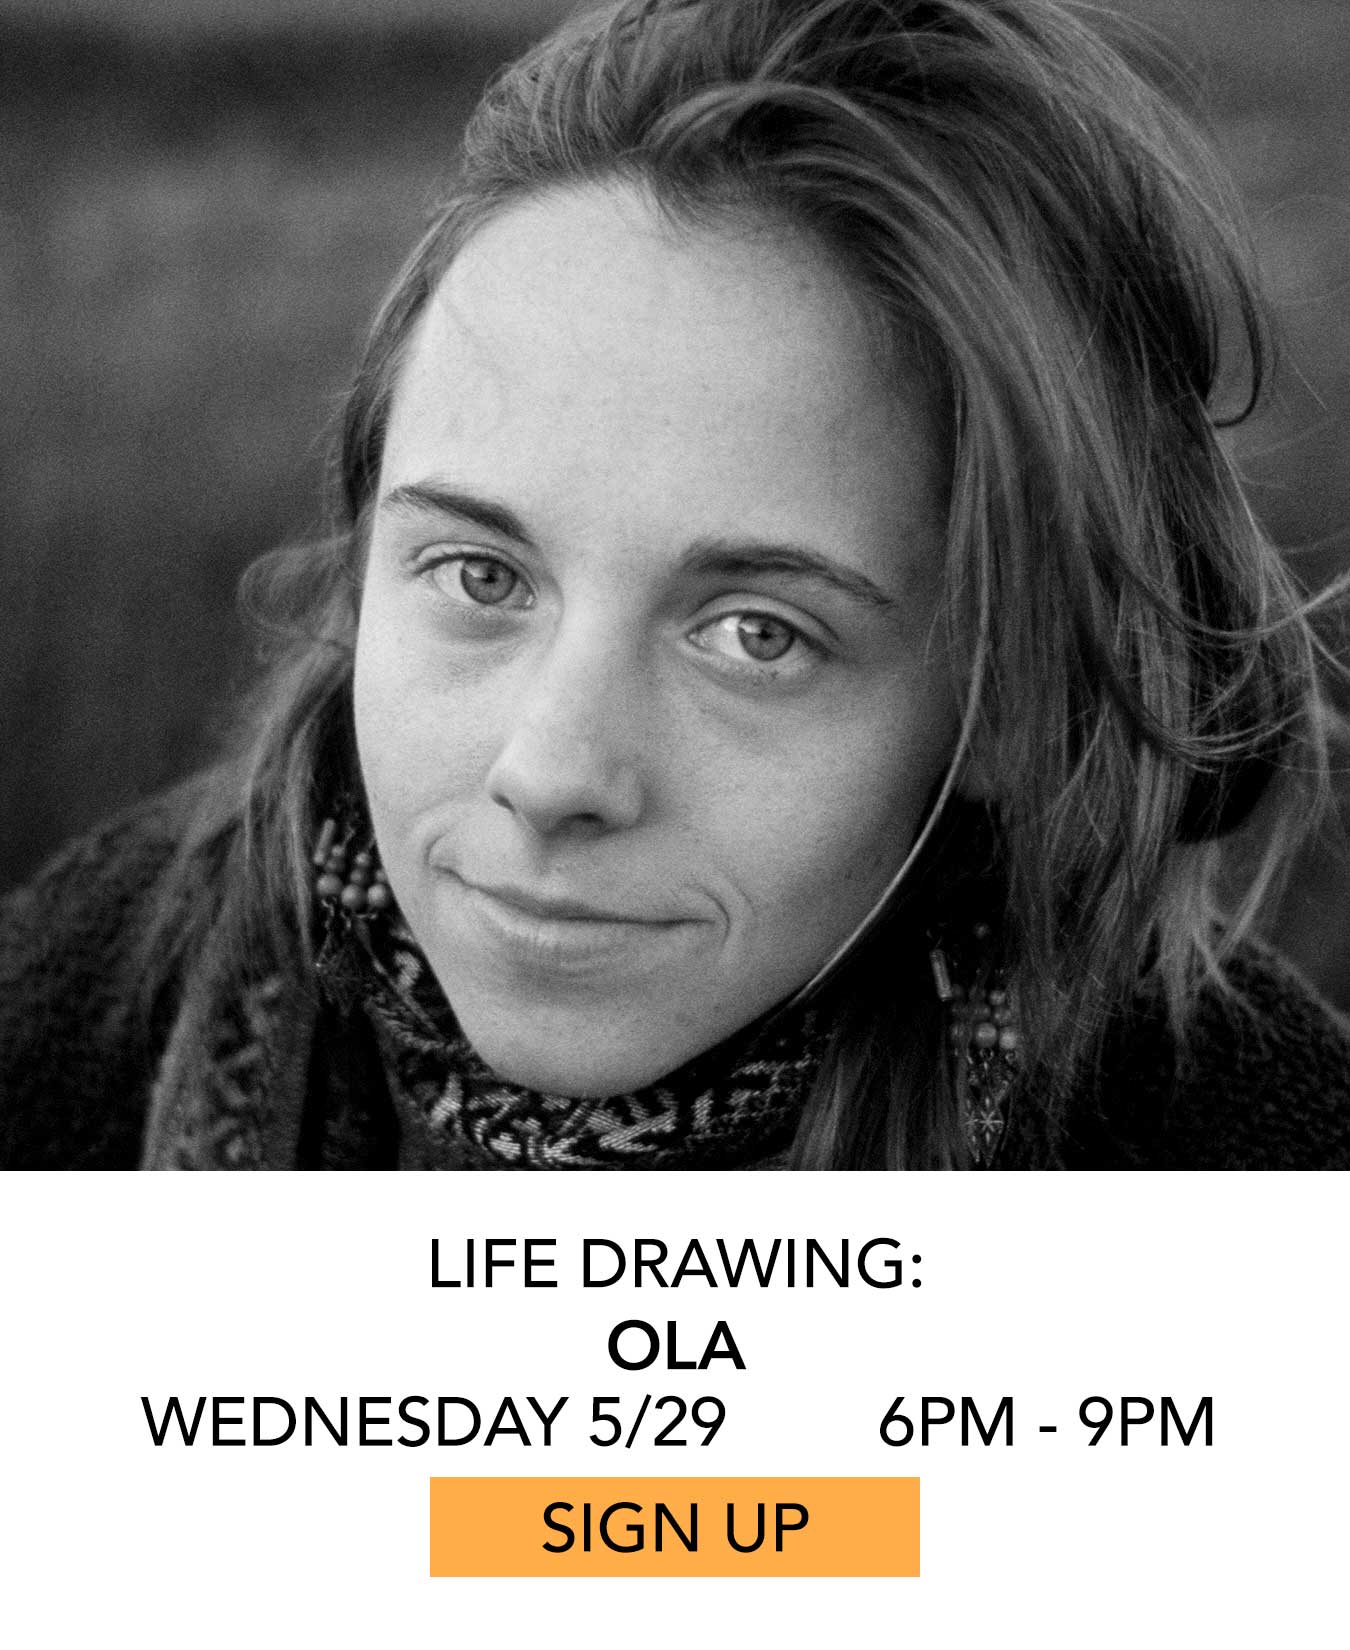 Life Drawing: Ola. Wednesday 5/29 from 6pm to 9pm. Click to Sign Up.